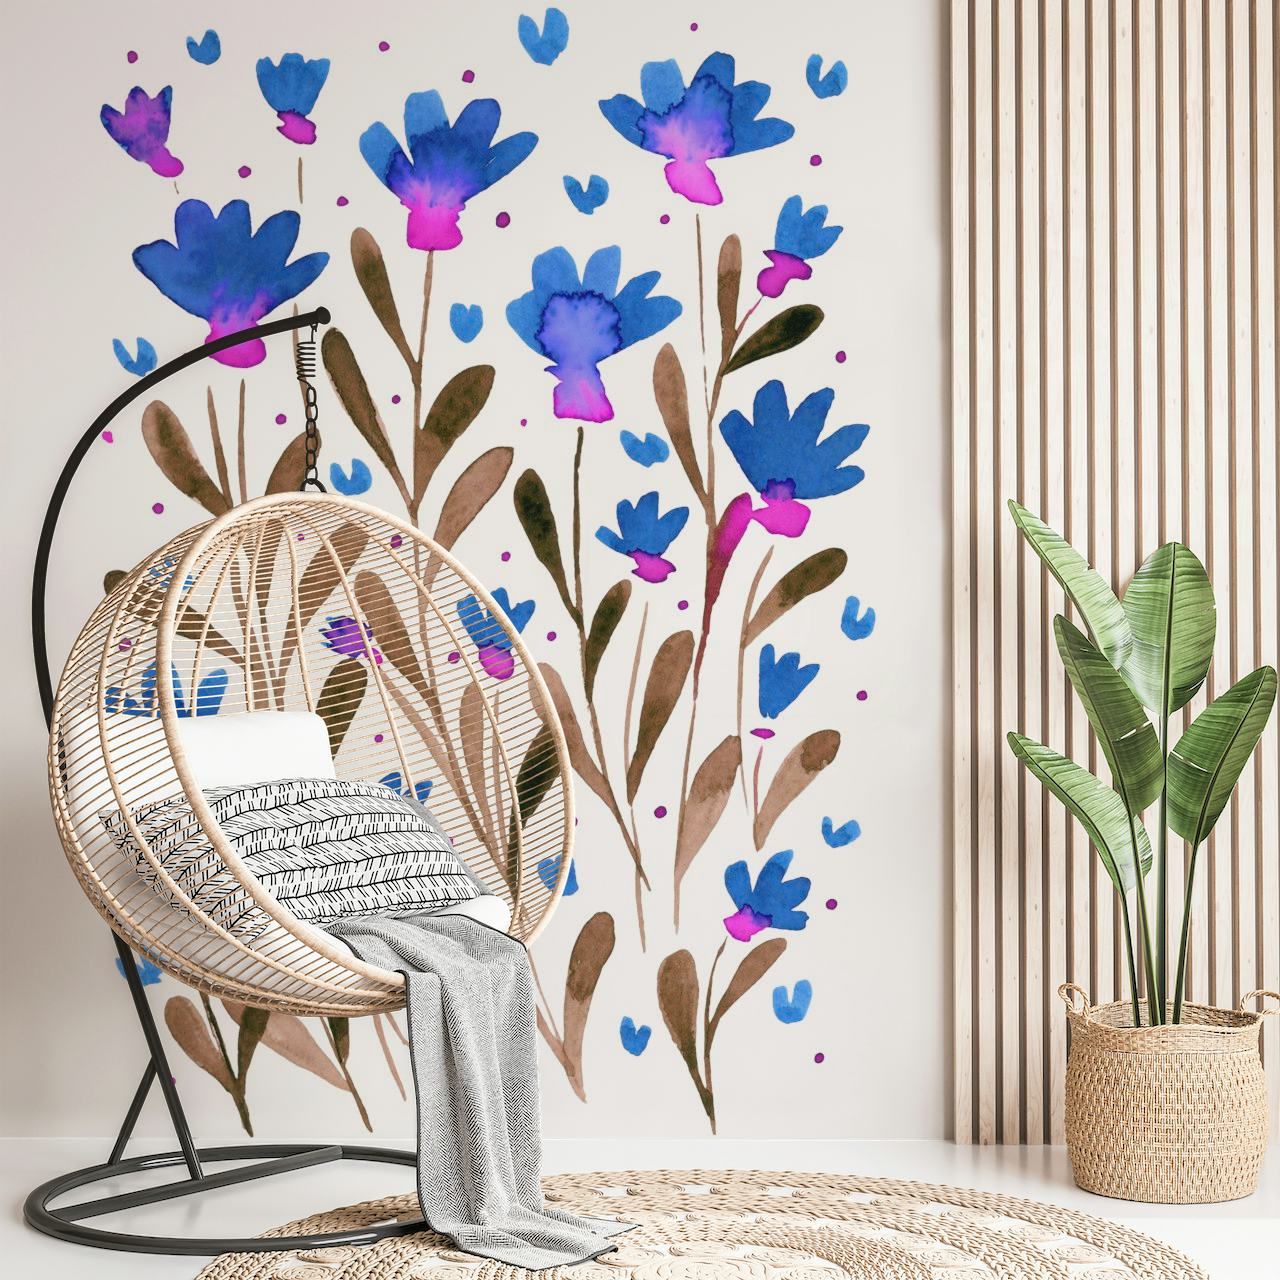 Forget me not flowers - blue and pink papel pintado